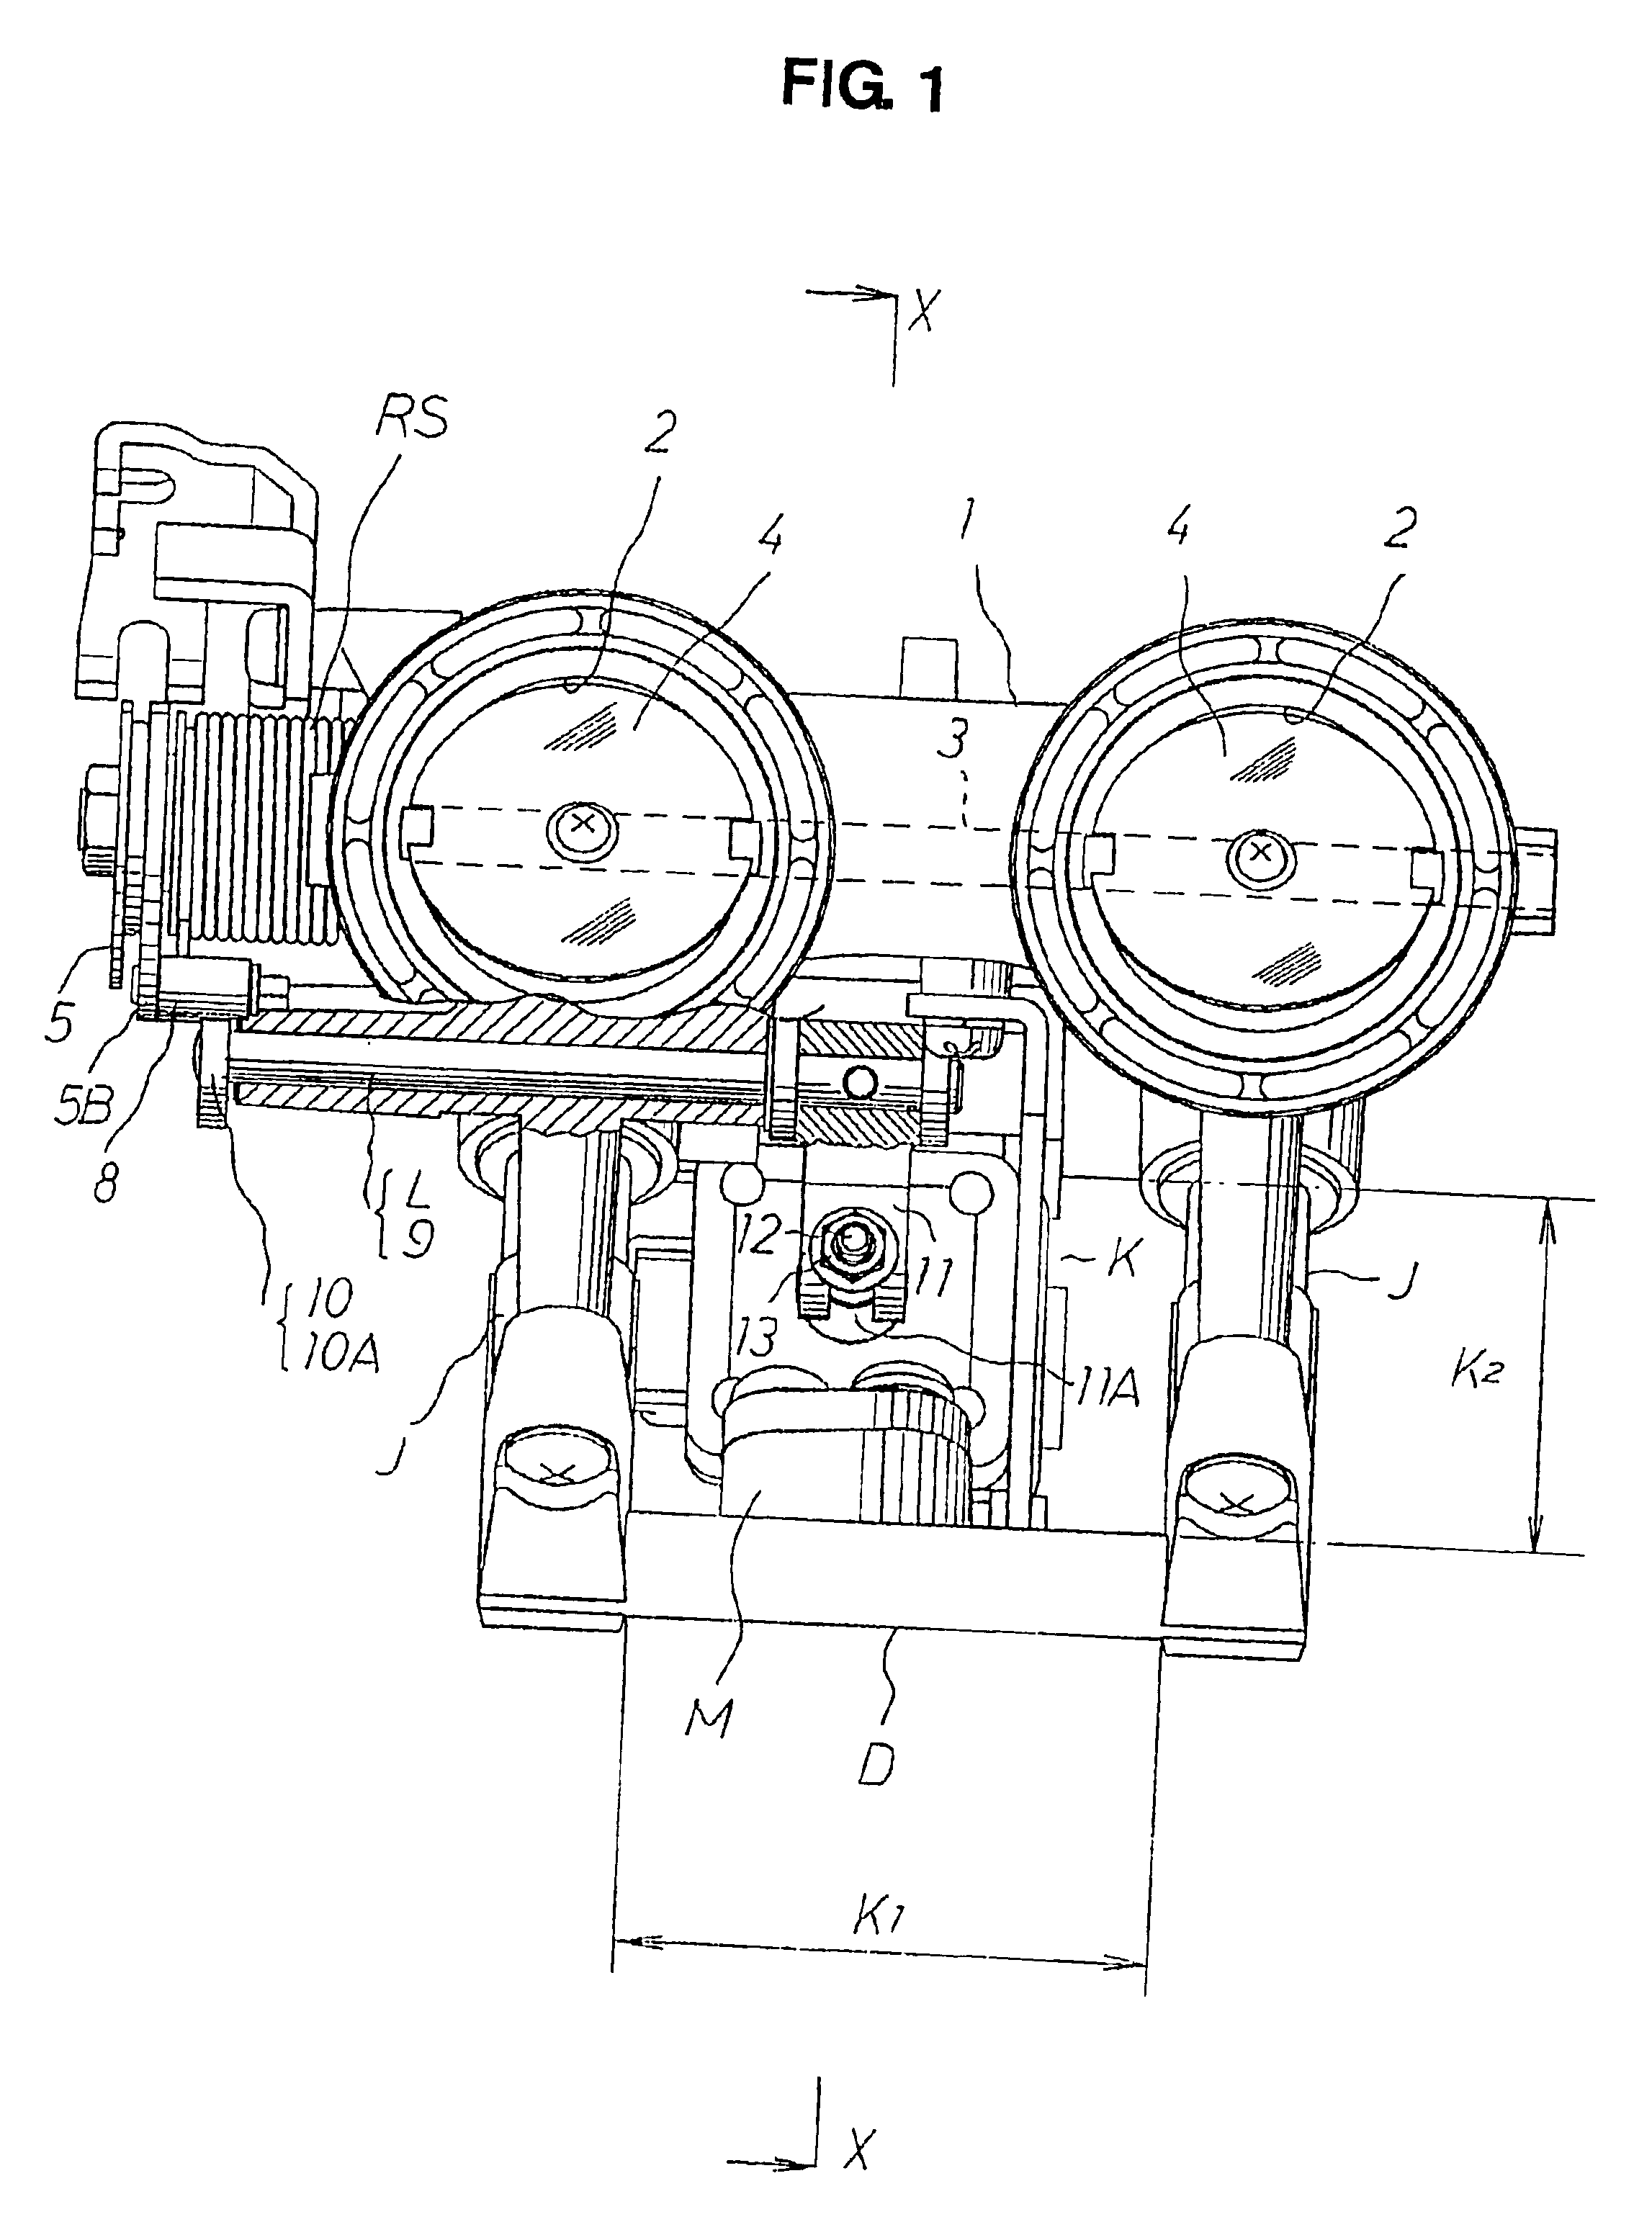 Idle speed control apparatus in throttle body